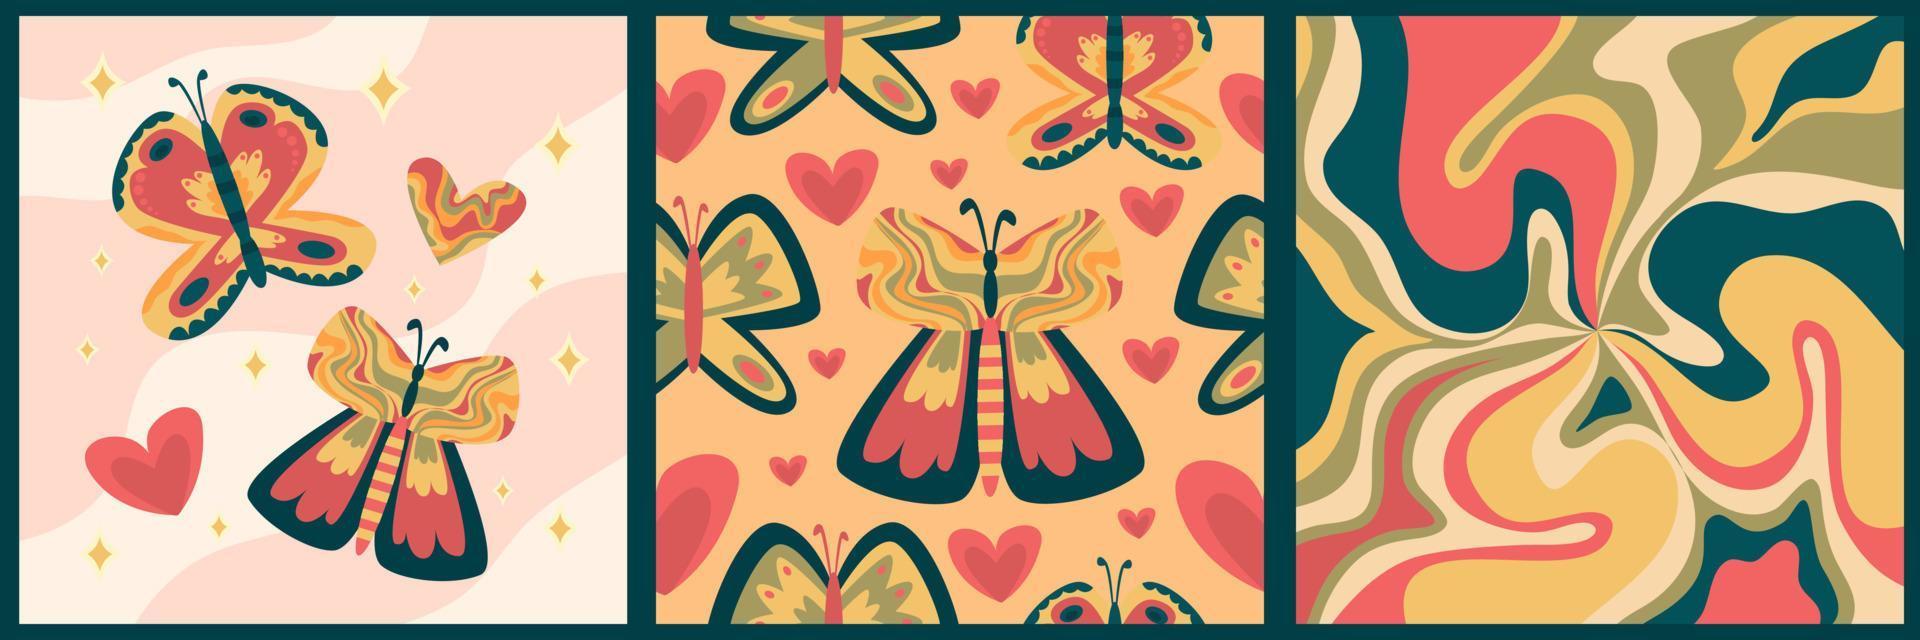 Retro boho poster set with butterfly hippie. Vintage 70s background. Hippie print illustration. Rainbow 60s, 70s, groovy vector